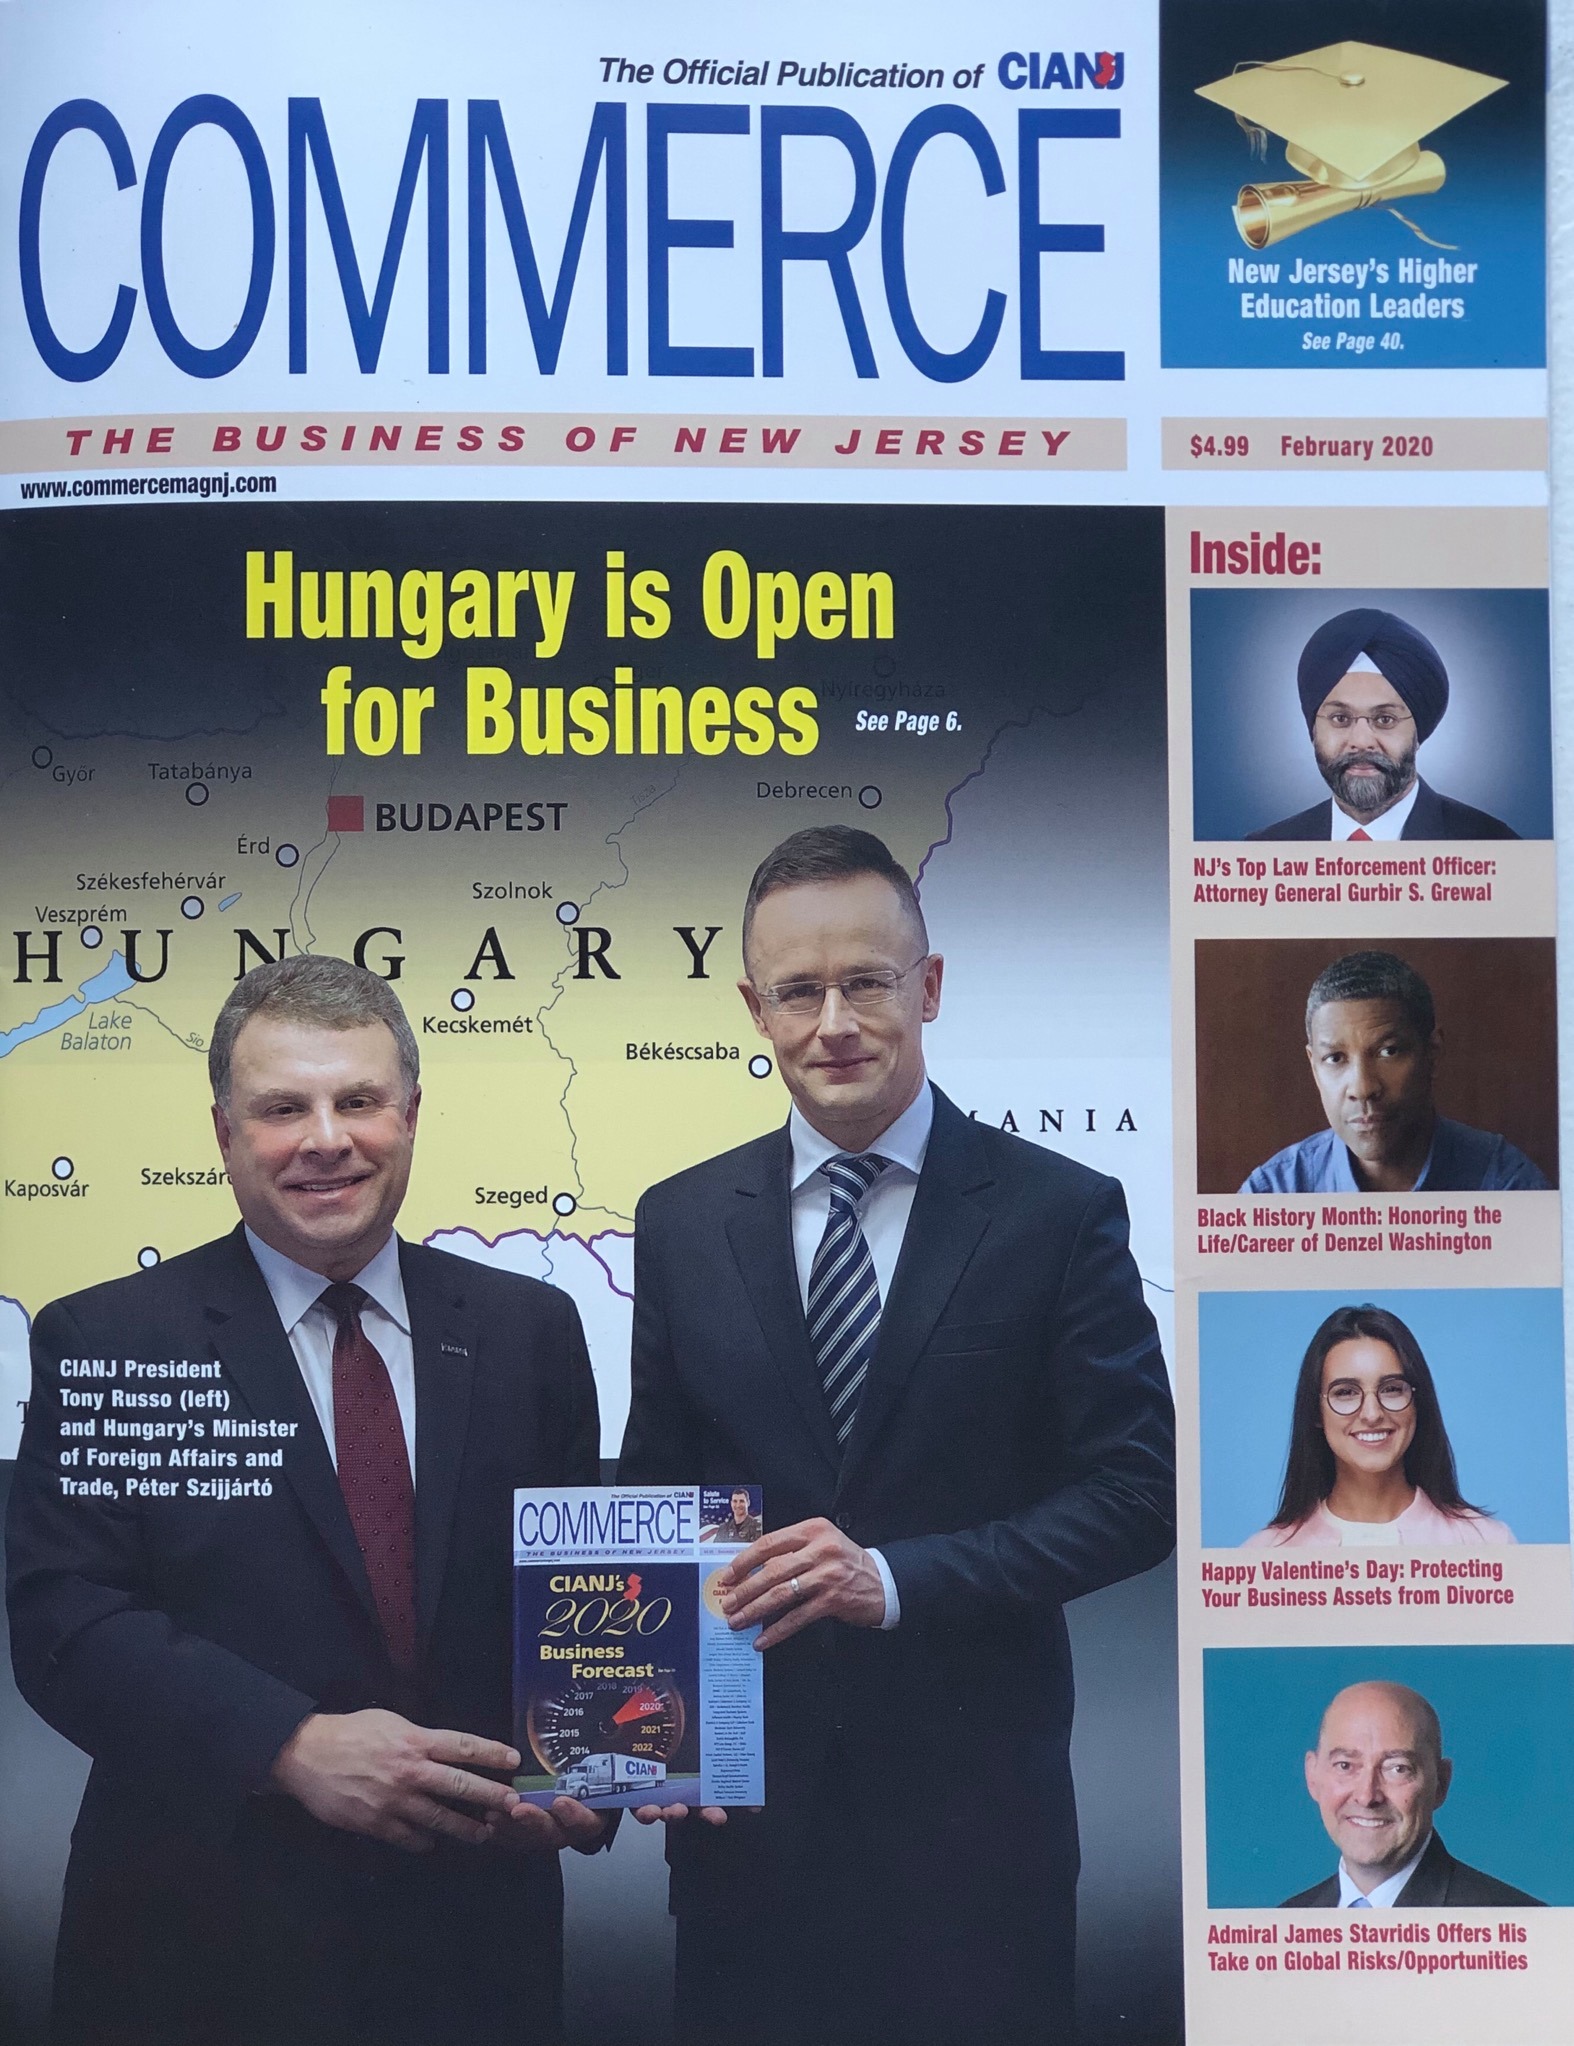 Hungary is open for business